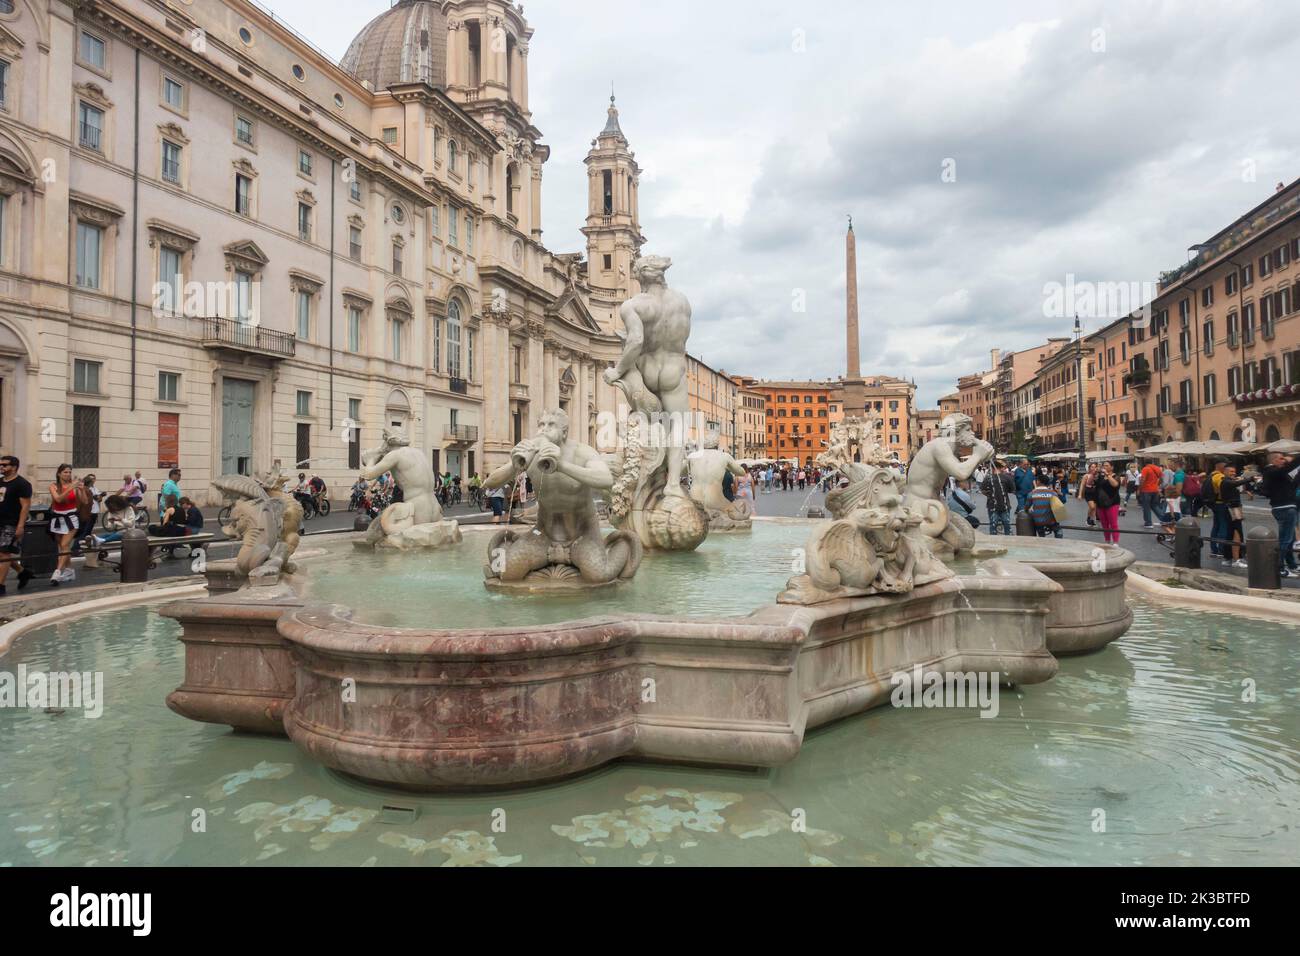 Rome, Italy - September 25, 2022 -  Tourists enjoying sightseeing in Piazza Navona next to a Baroque fountaint Stock Photo